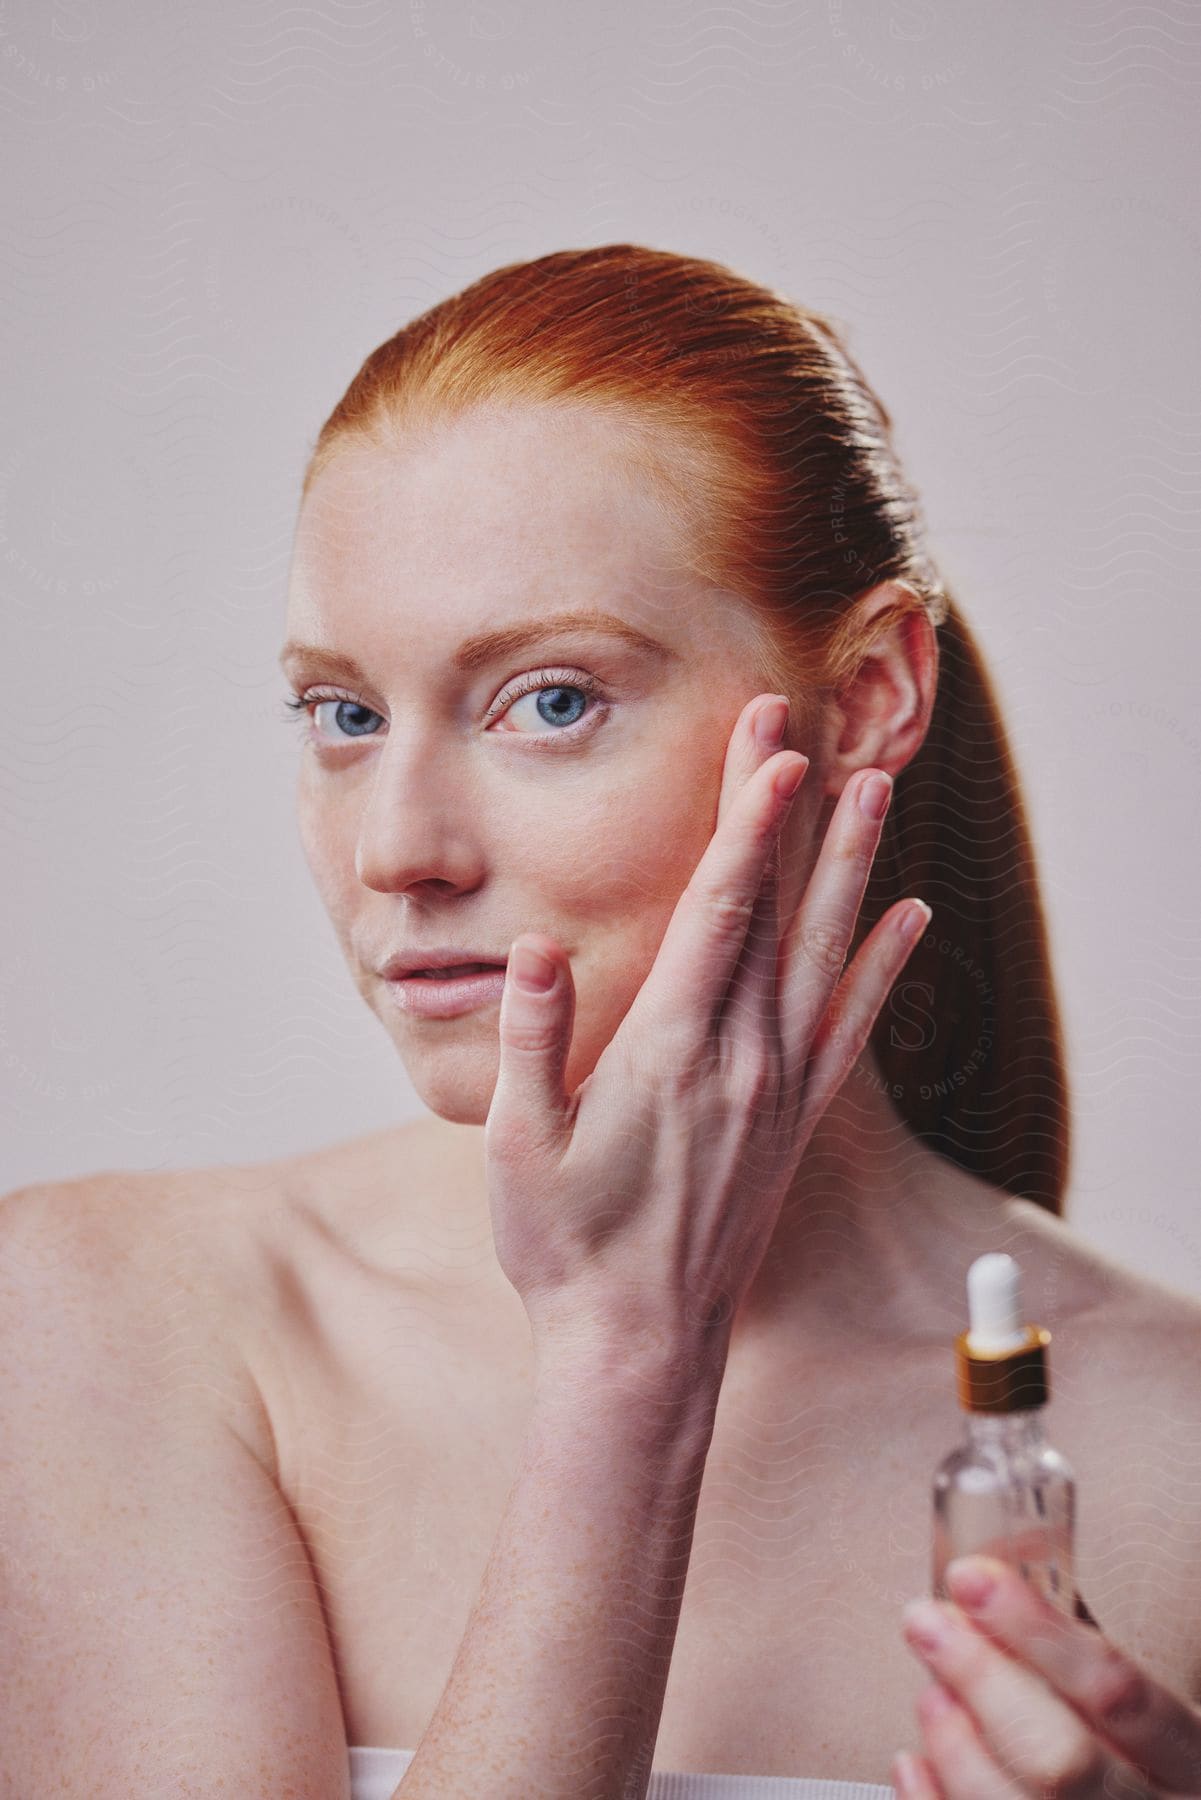 A woman putting oil on her face